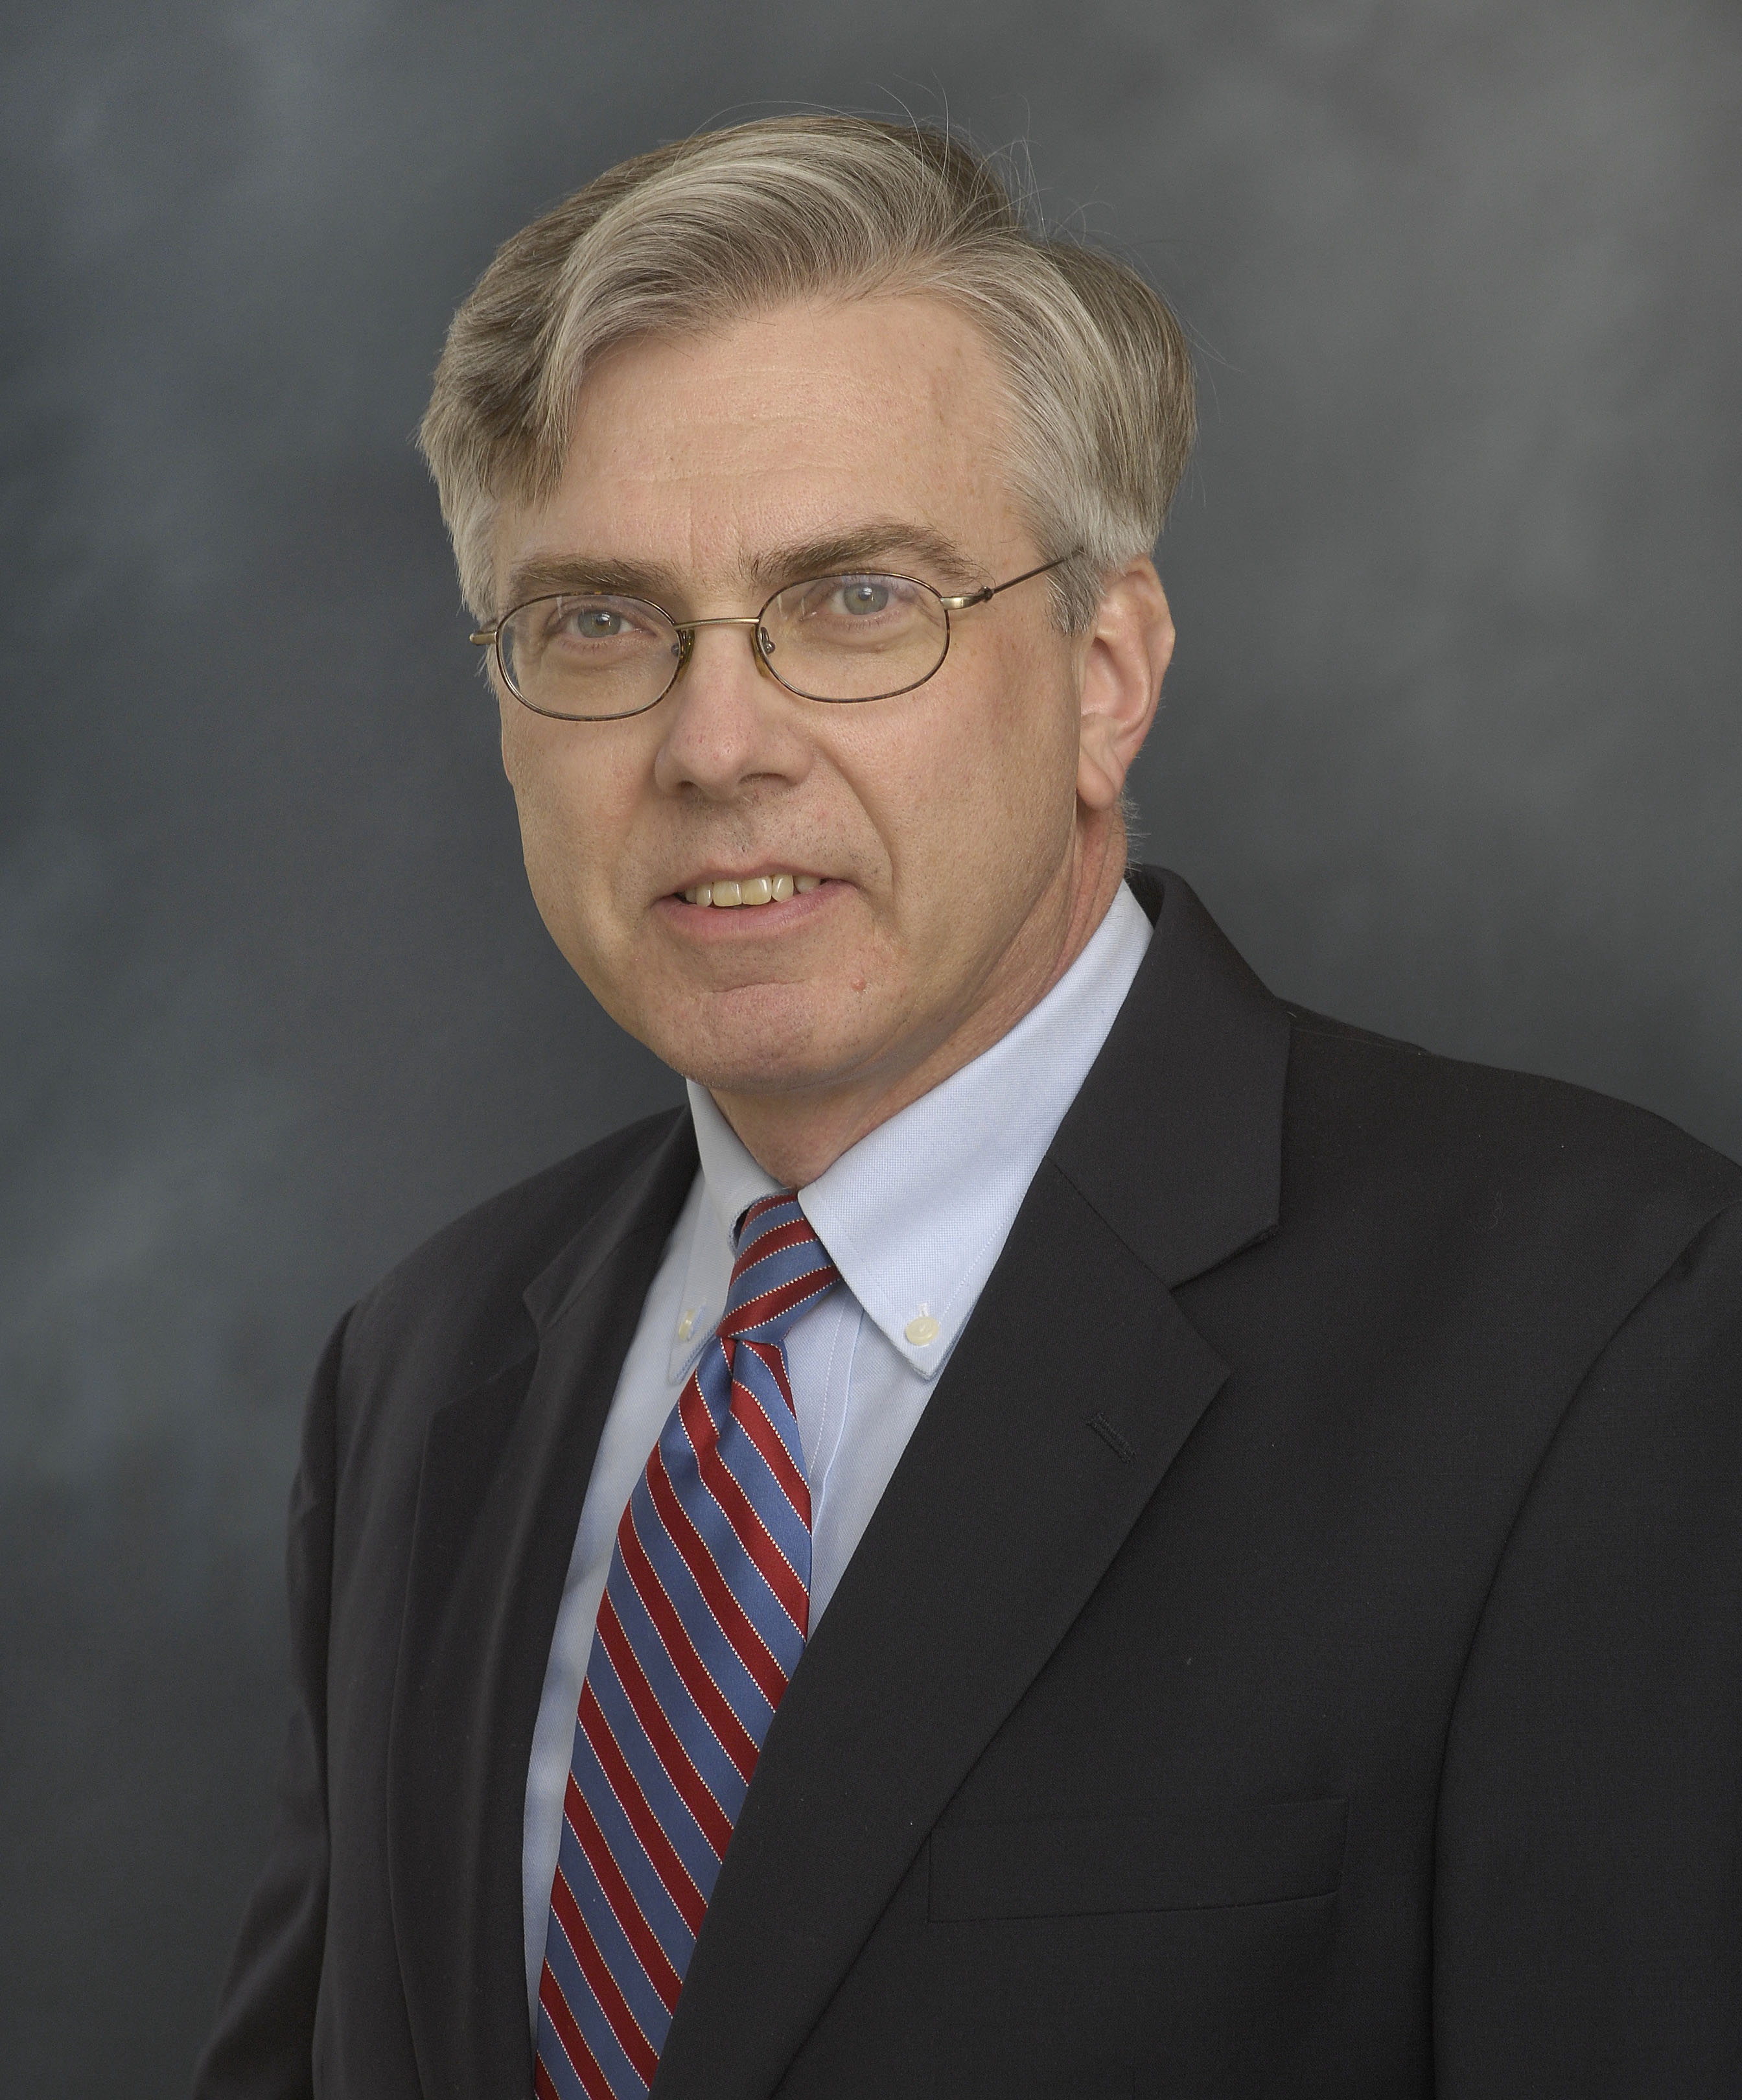 William J. Lindblad, Ph.D, Director of the Office of Research and Scholarship at Husson University